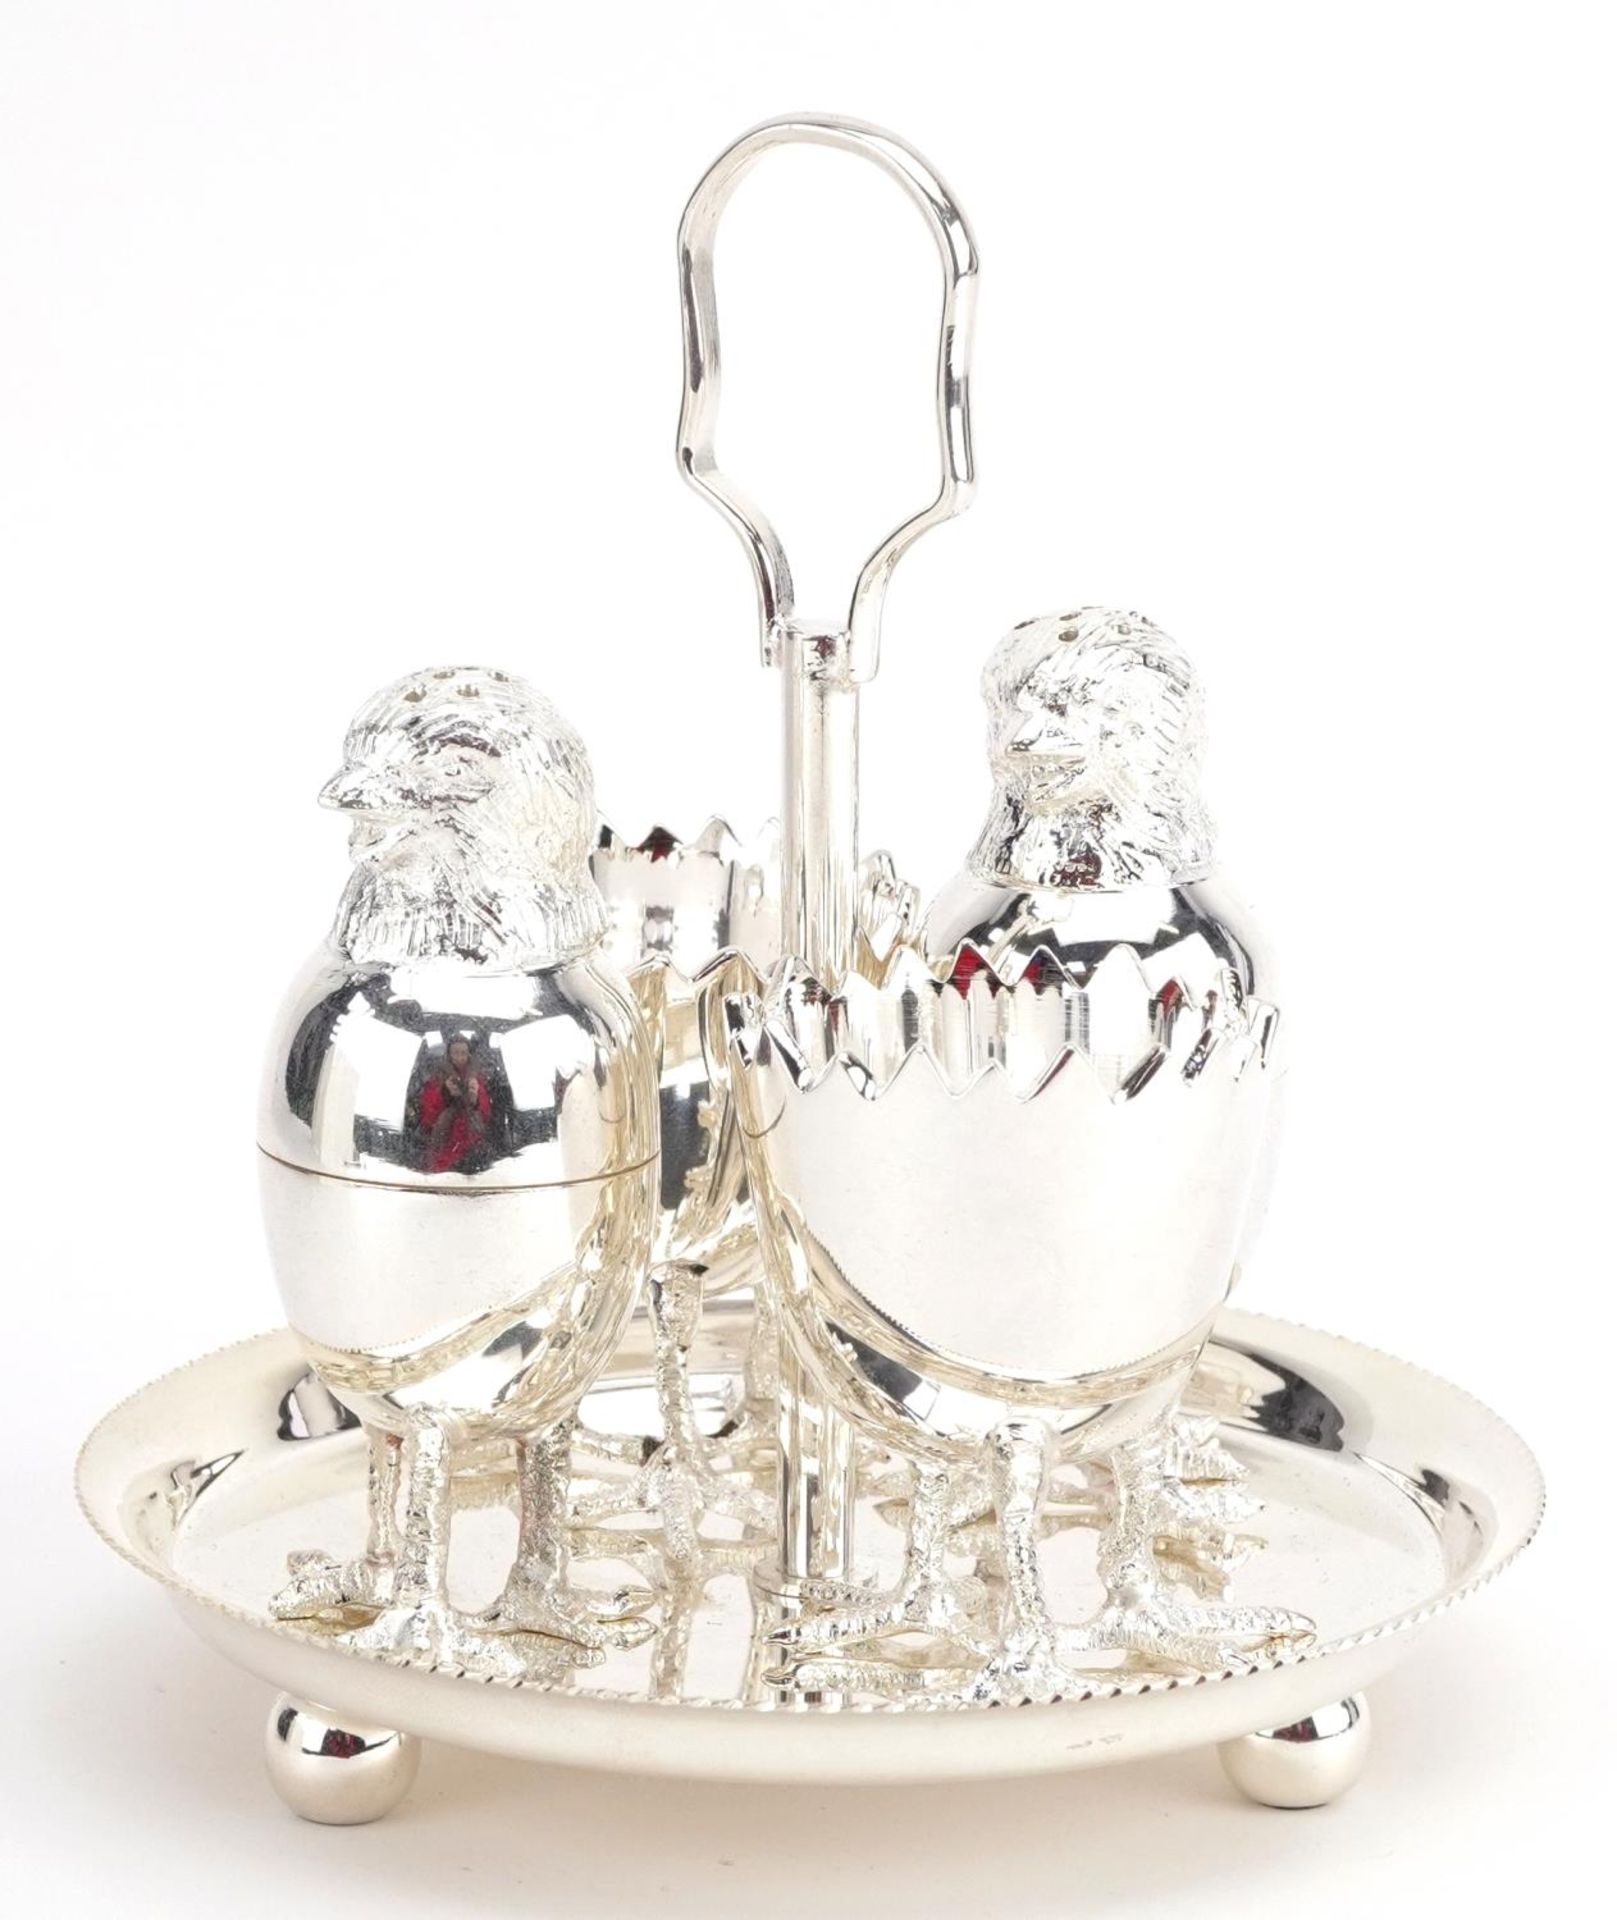 Novelty silver plated chick design four piece cruet on stand, 13.5cm high : For further